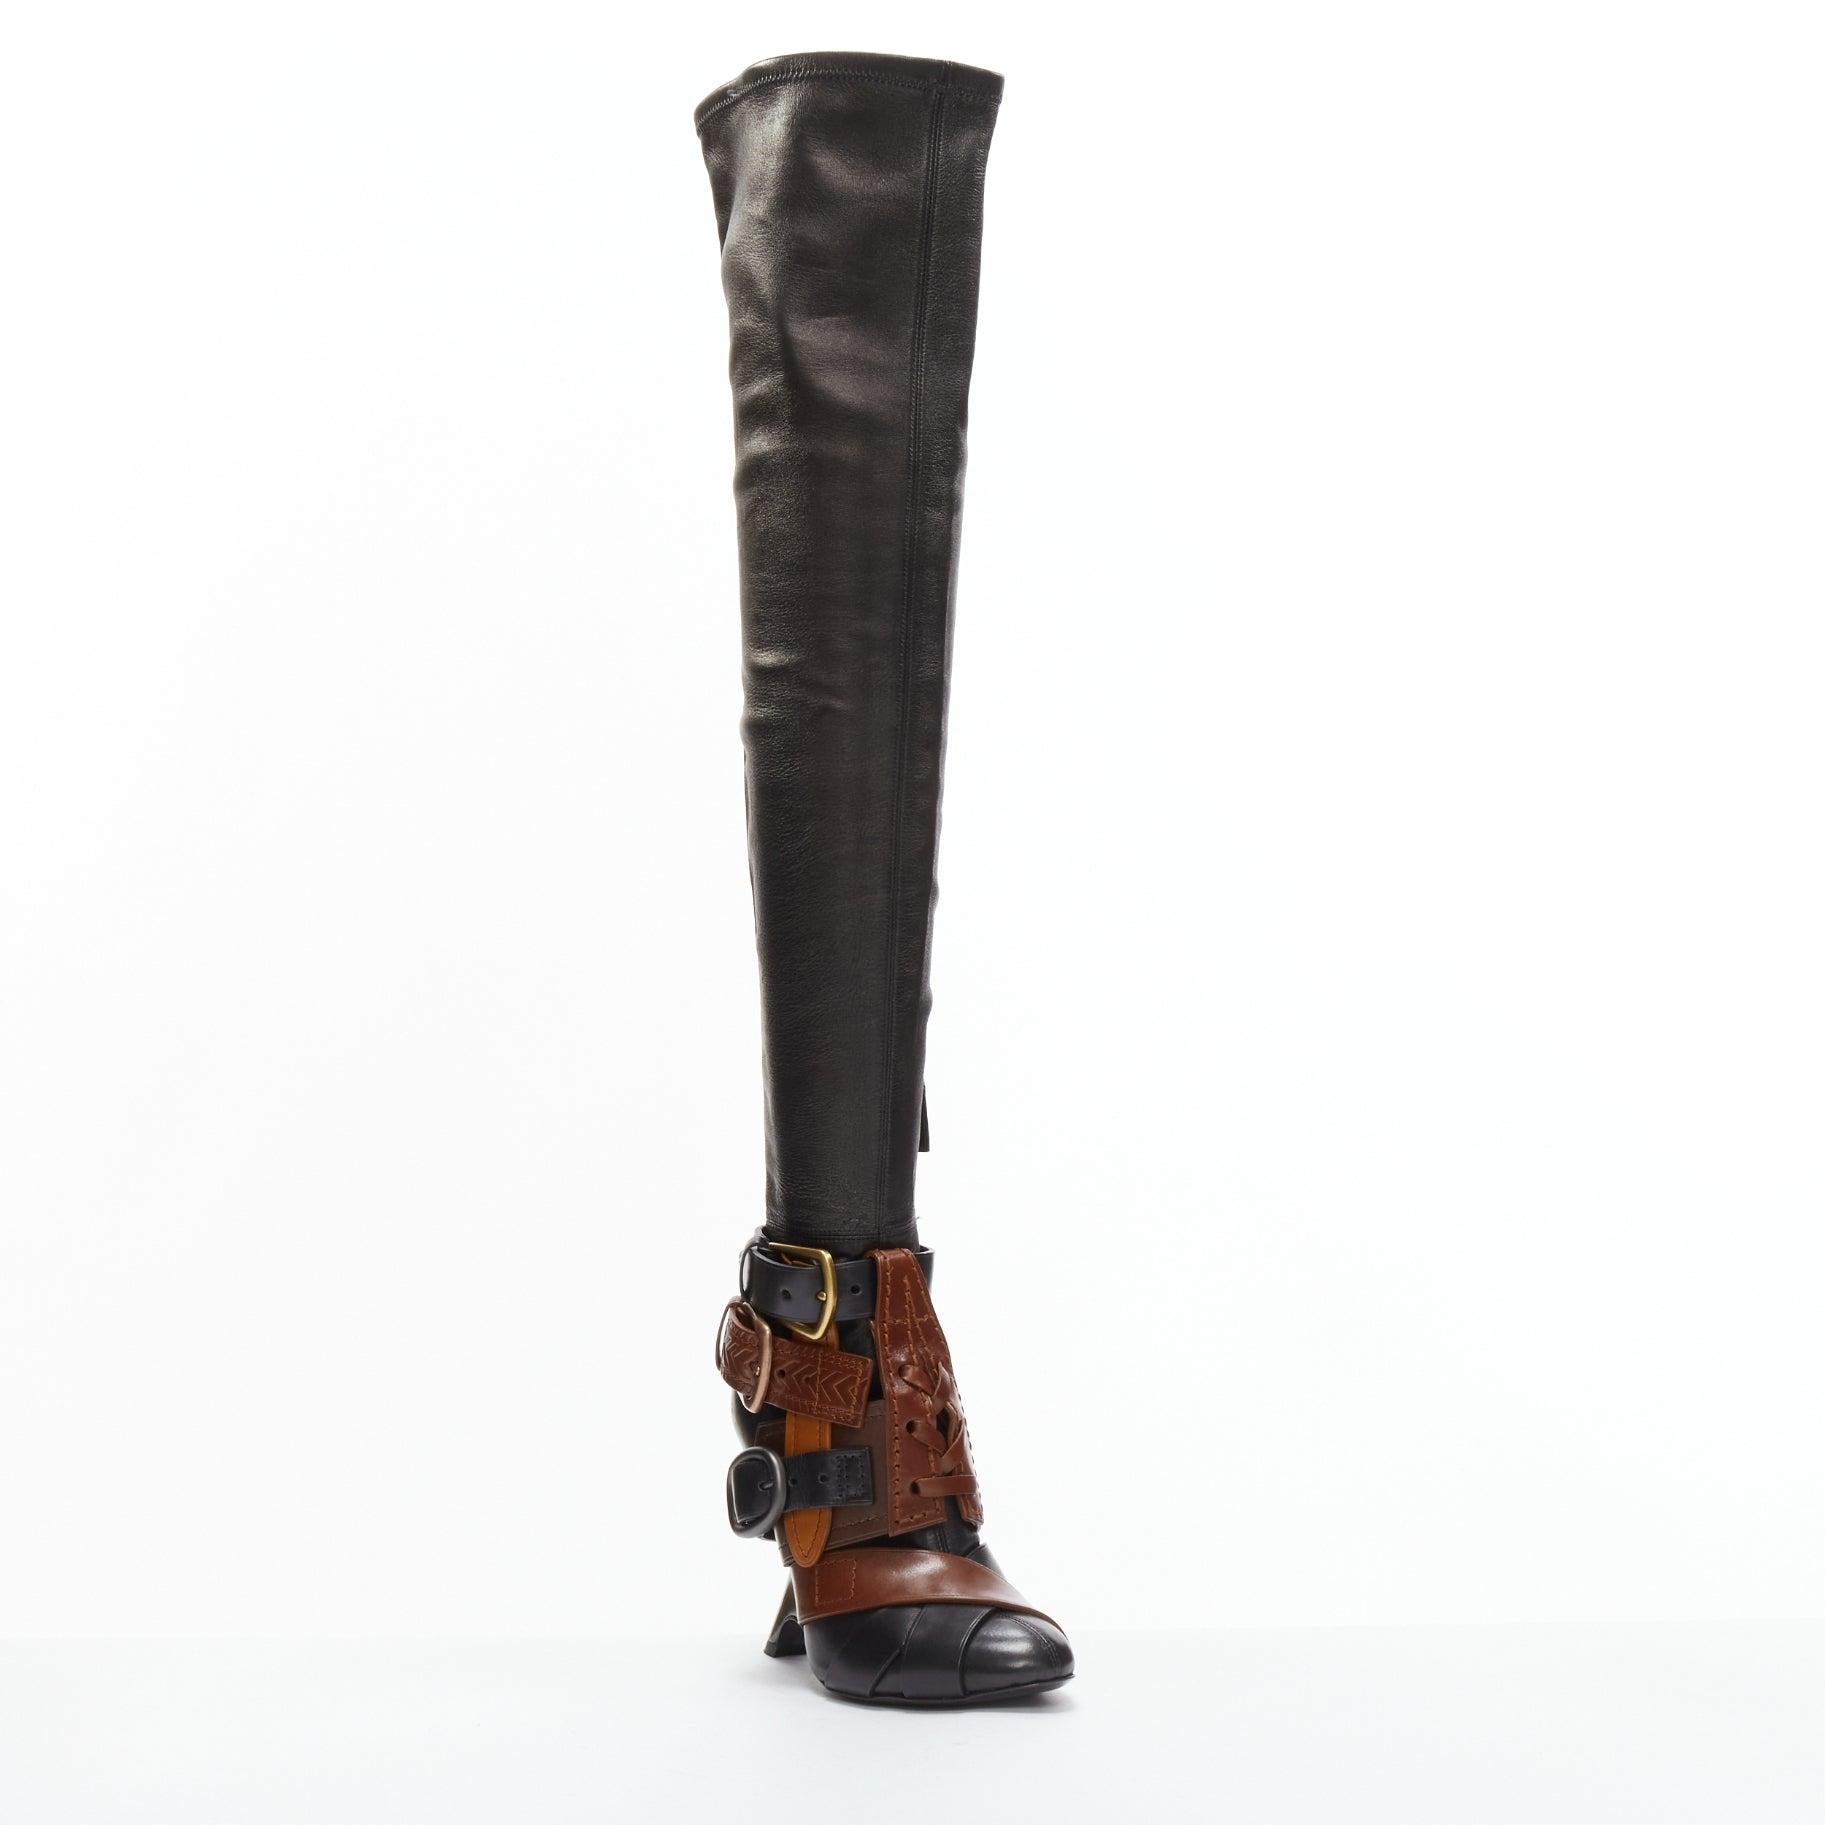 rare TOM FORD Runway brown multi belt buckle thigh high boots EU37.5
Reference: TGAS/D00721
Brand: Tom Ford
Designer: Tom Ford
Collection: 2016 - Runway
Material: Leather, Metal
Color: Black, Brown
Pattern: Solid
Closure: Zip
Lining: Black